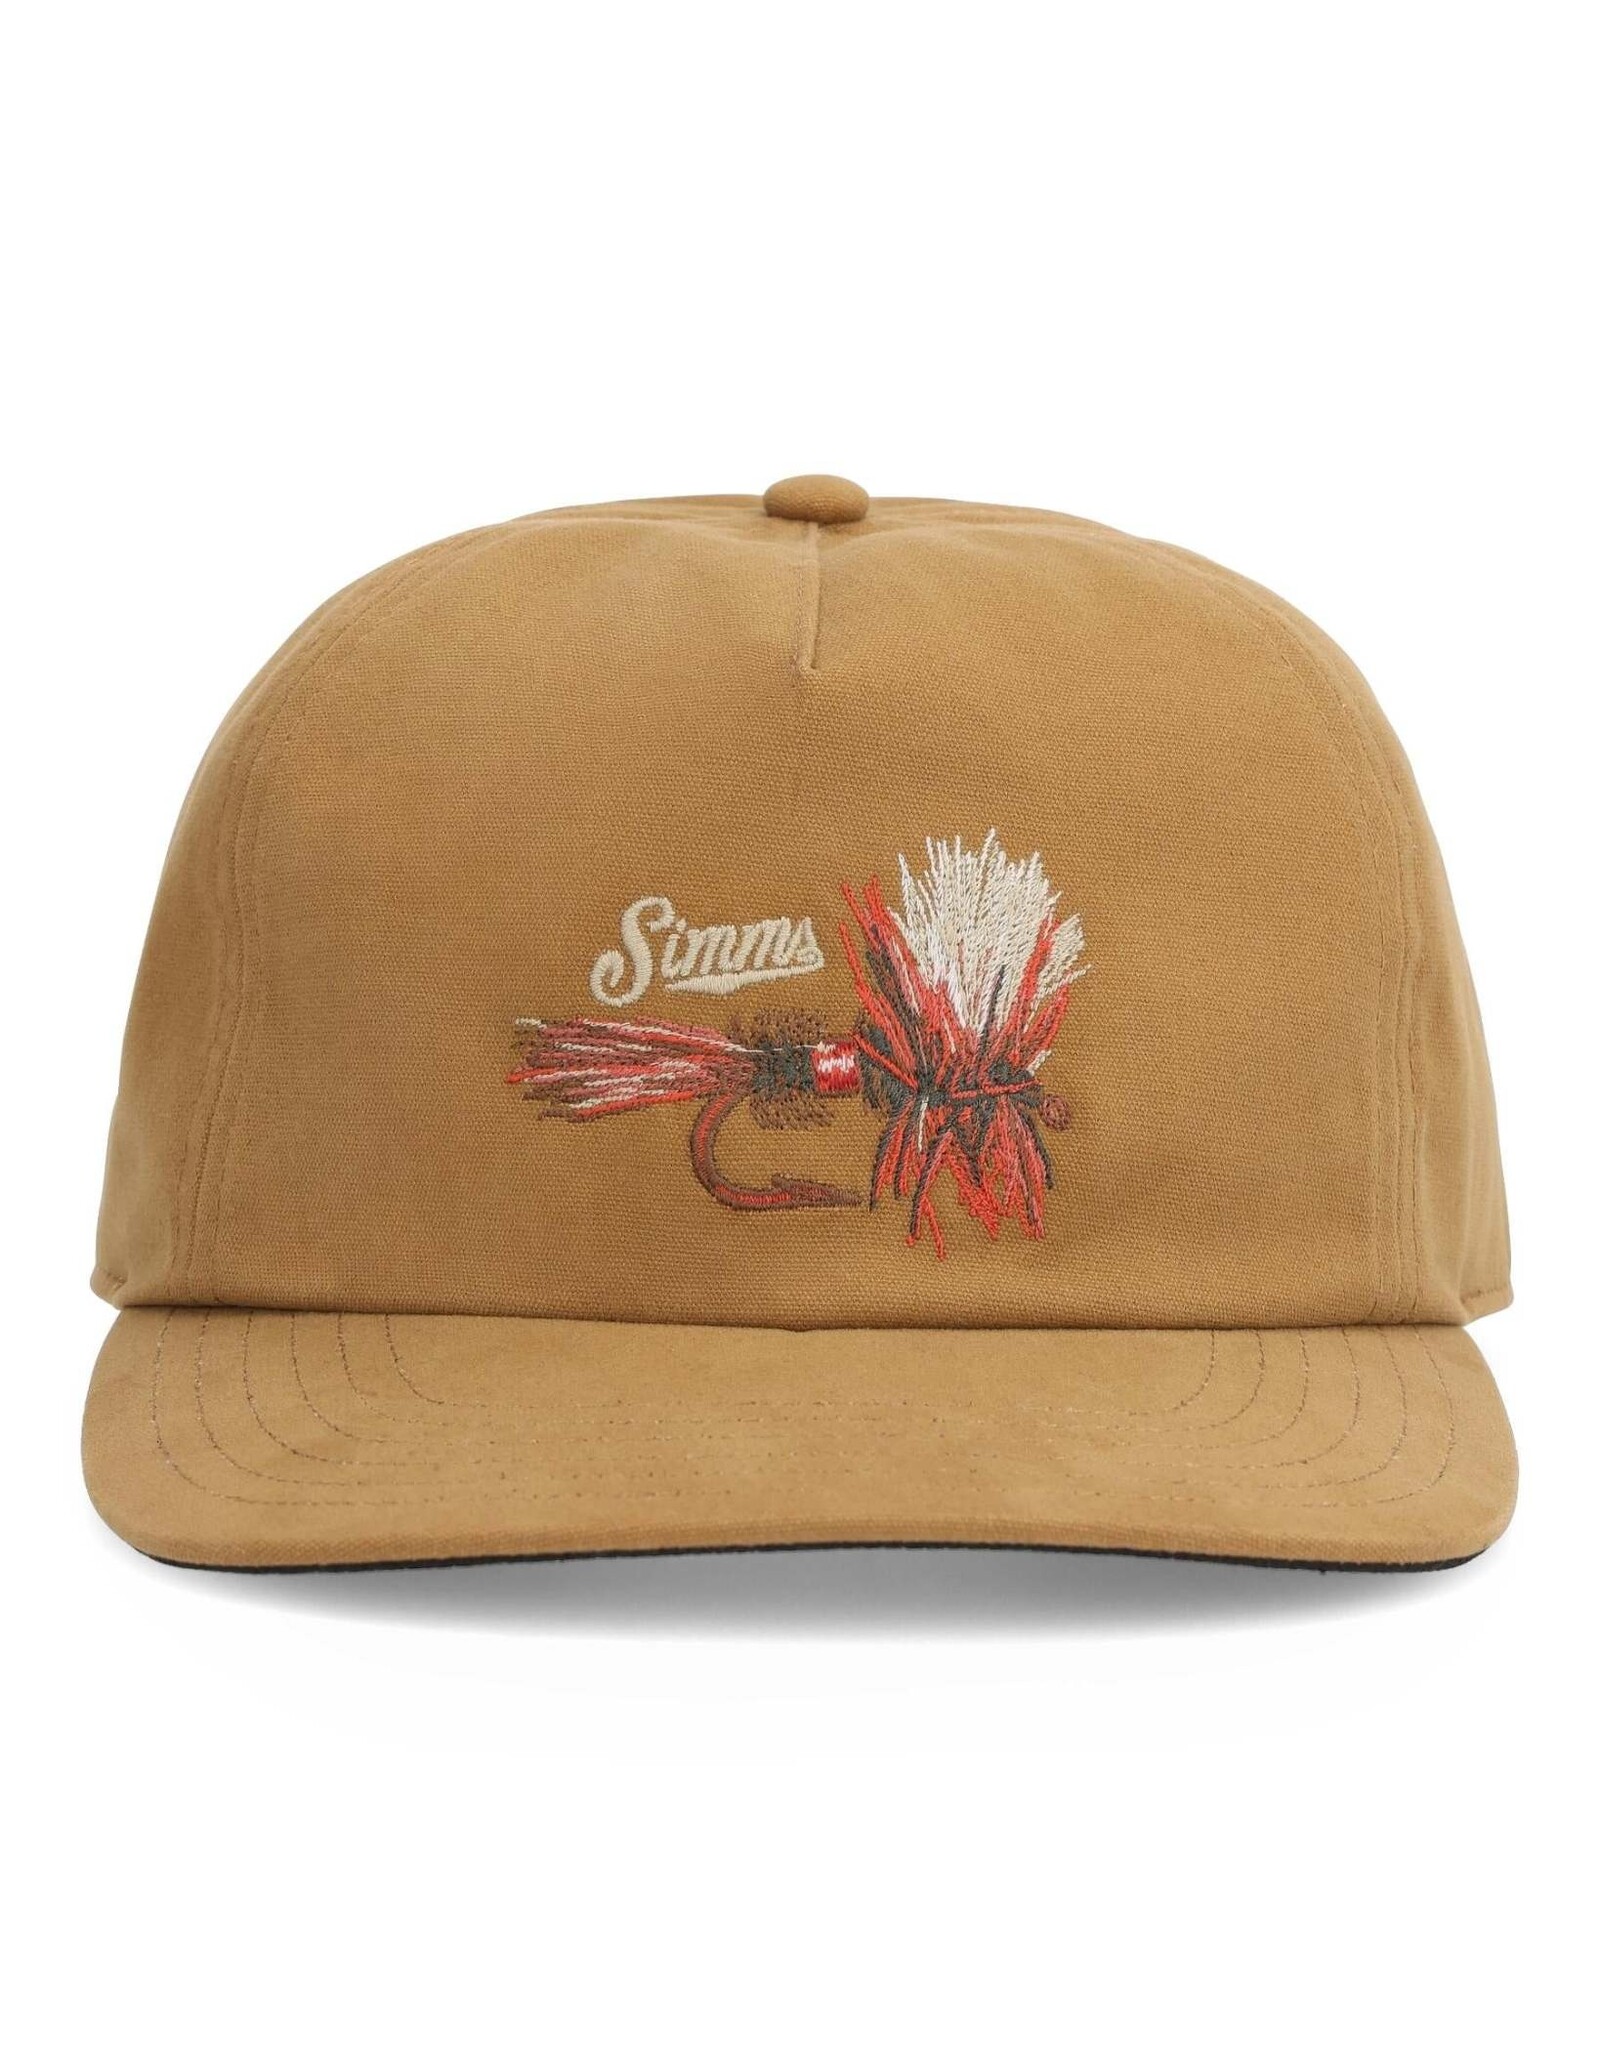 Simms Double Haul Cap Chestnut - Royal Gorge Anglers